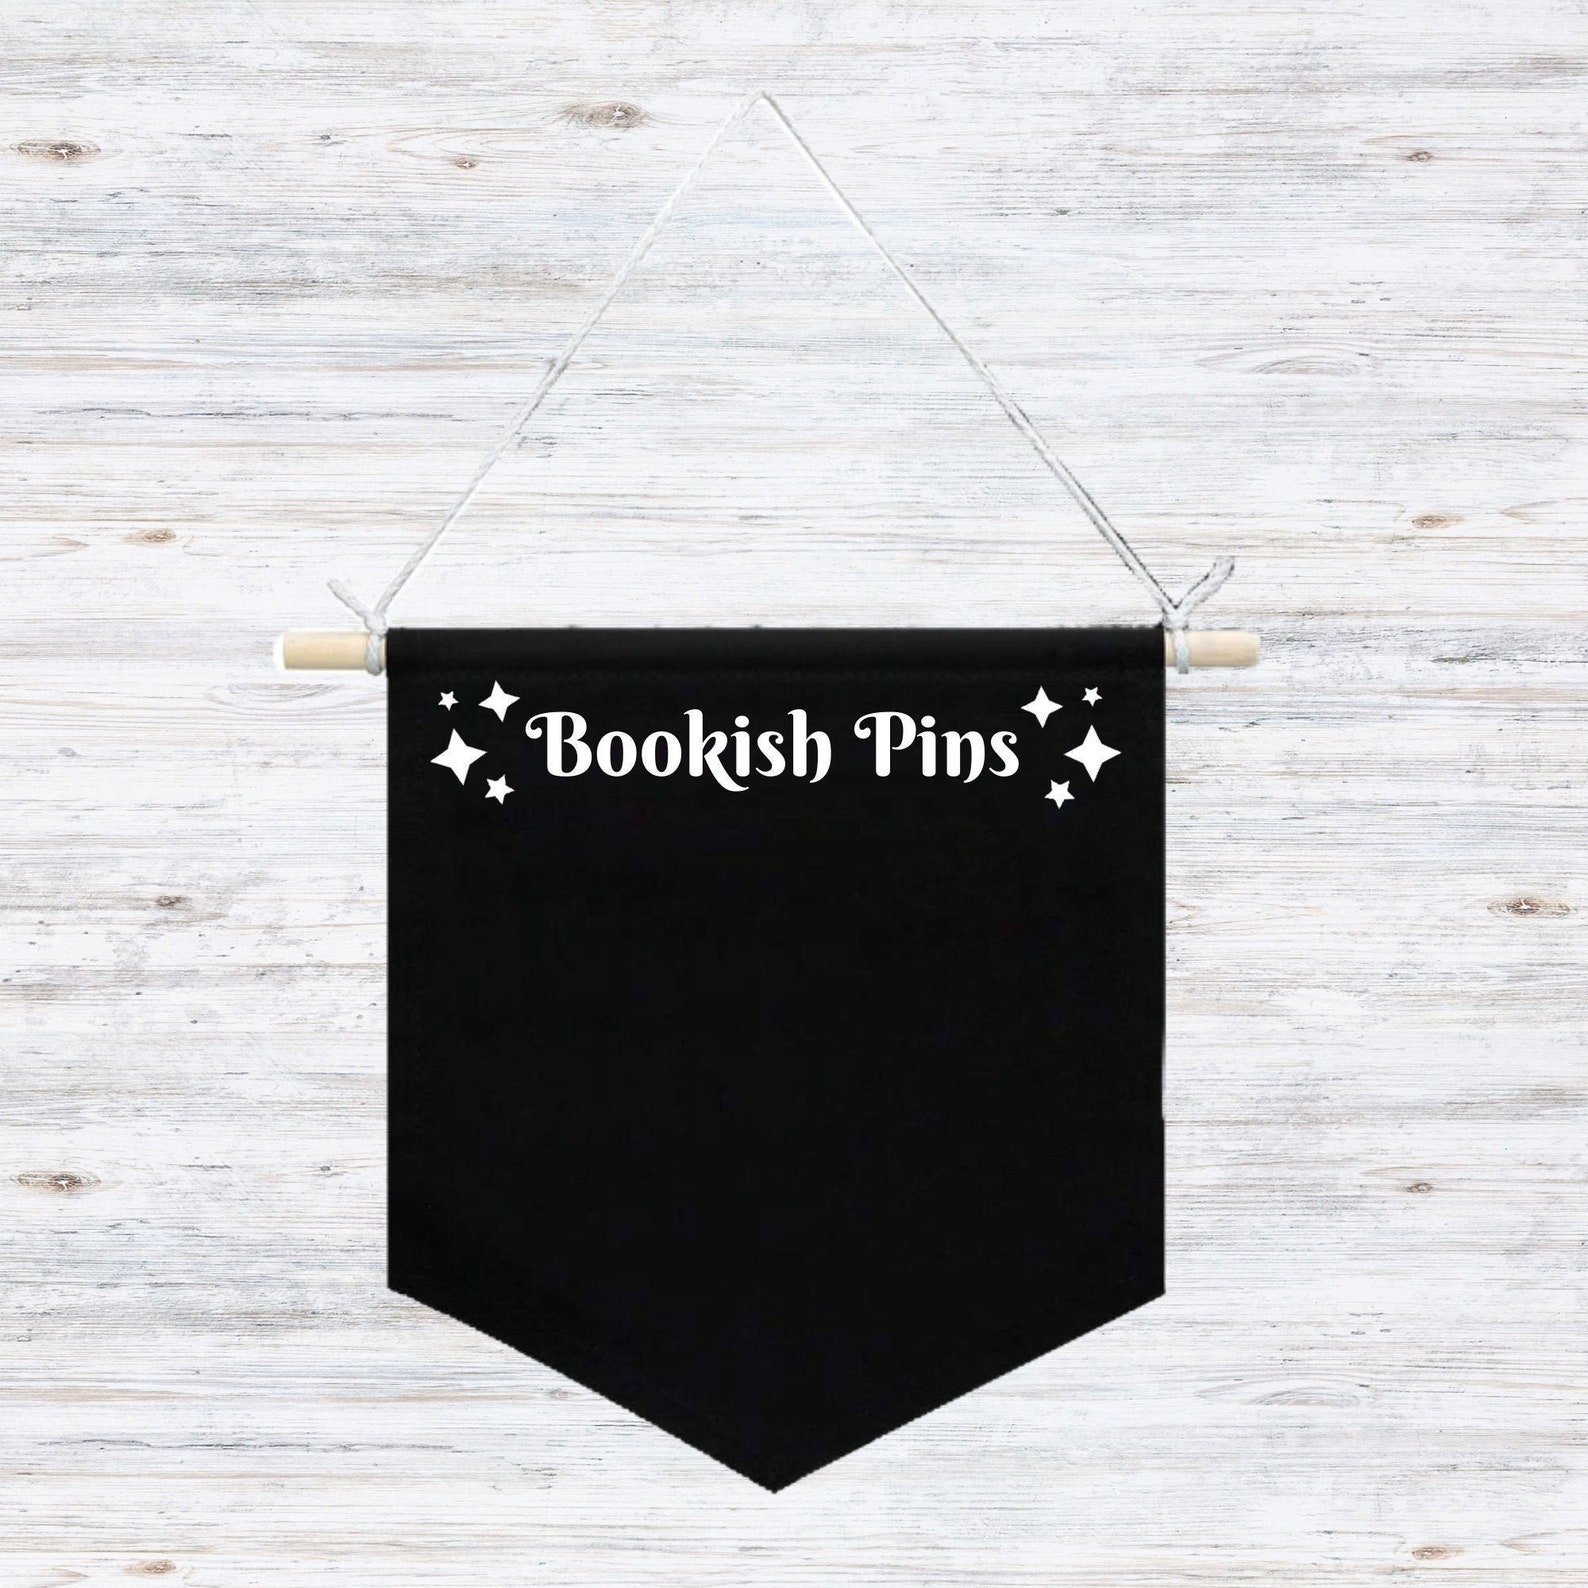 A small black banner that proclaims "Bookish pins"